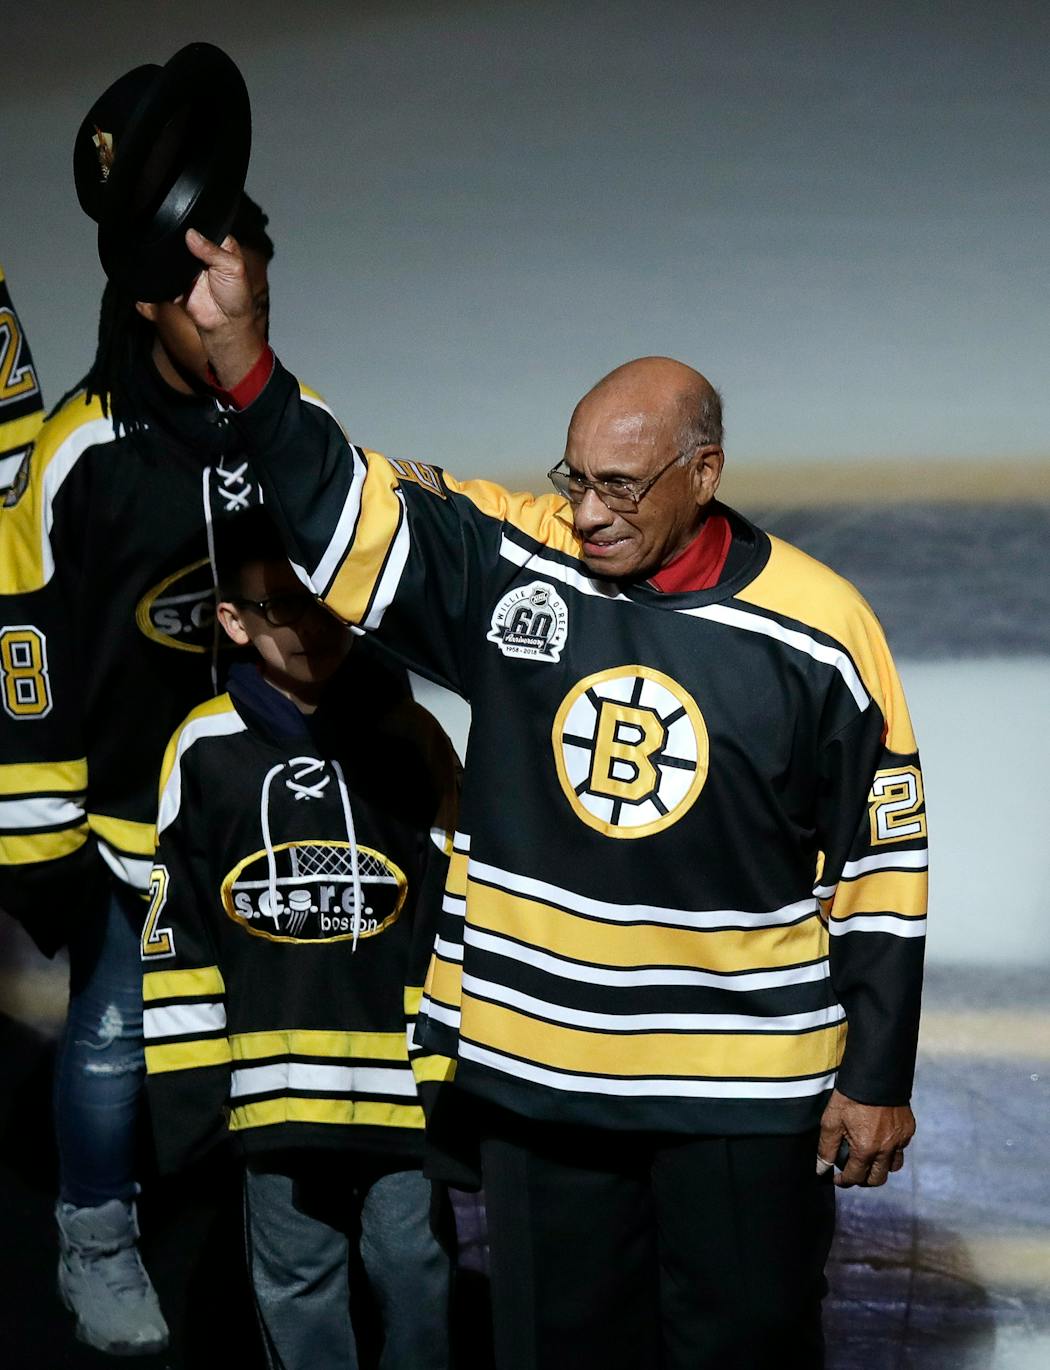 Former Boston Bruins player Willie O’Ree was honored before a game in Boston in January 2018. 